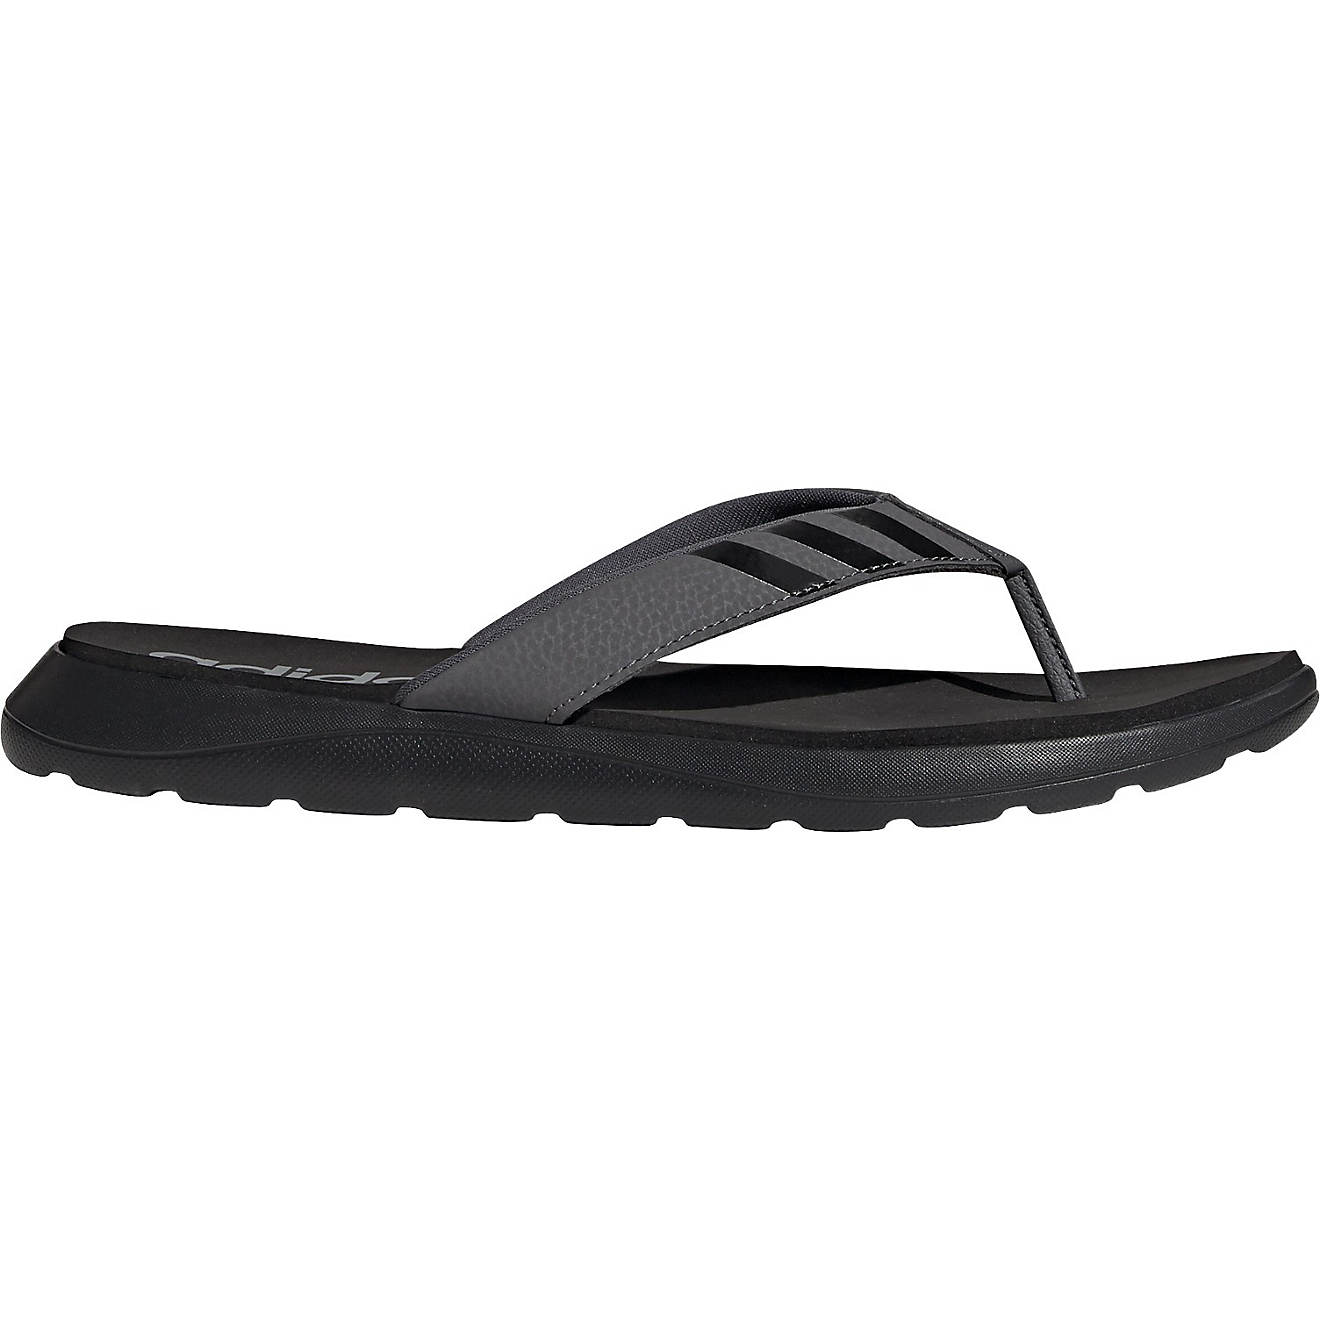 adidas Men's Comfort Sandals | Free Shipping at Academy